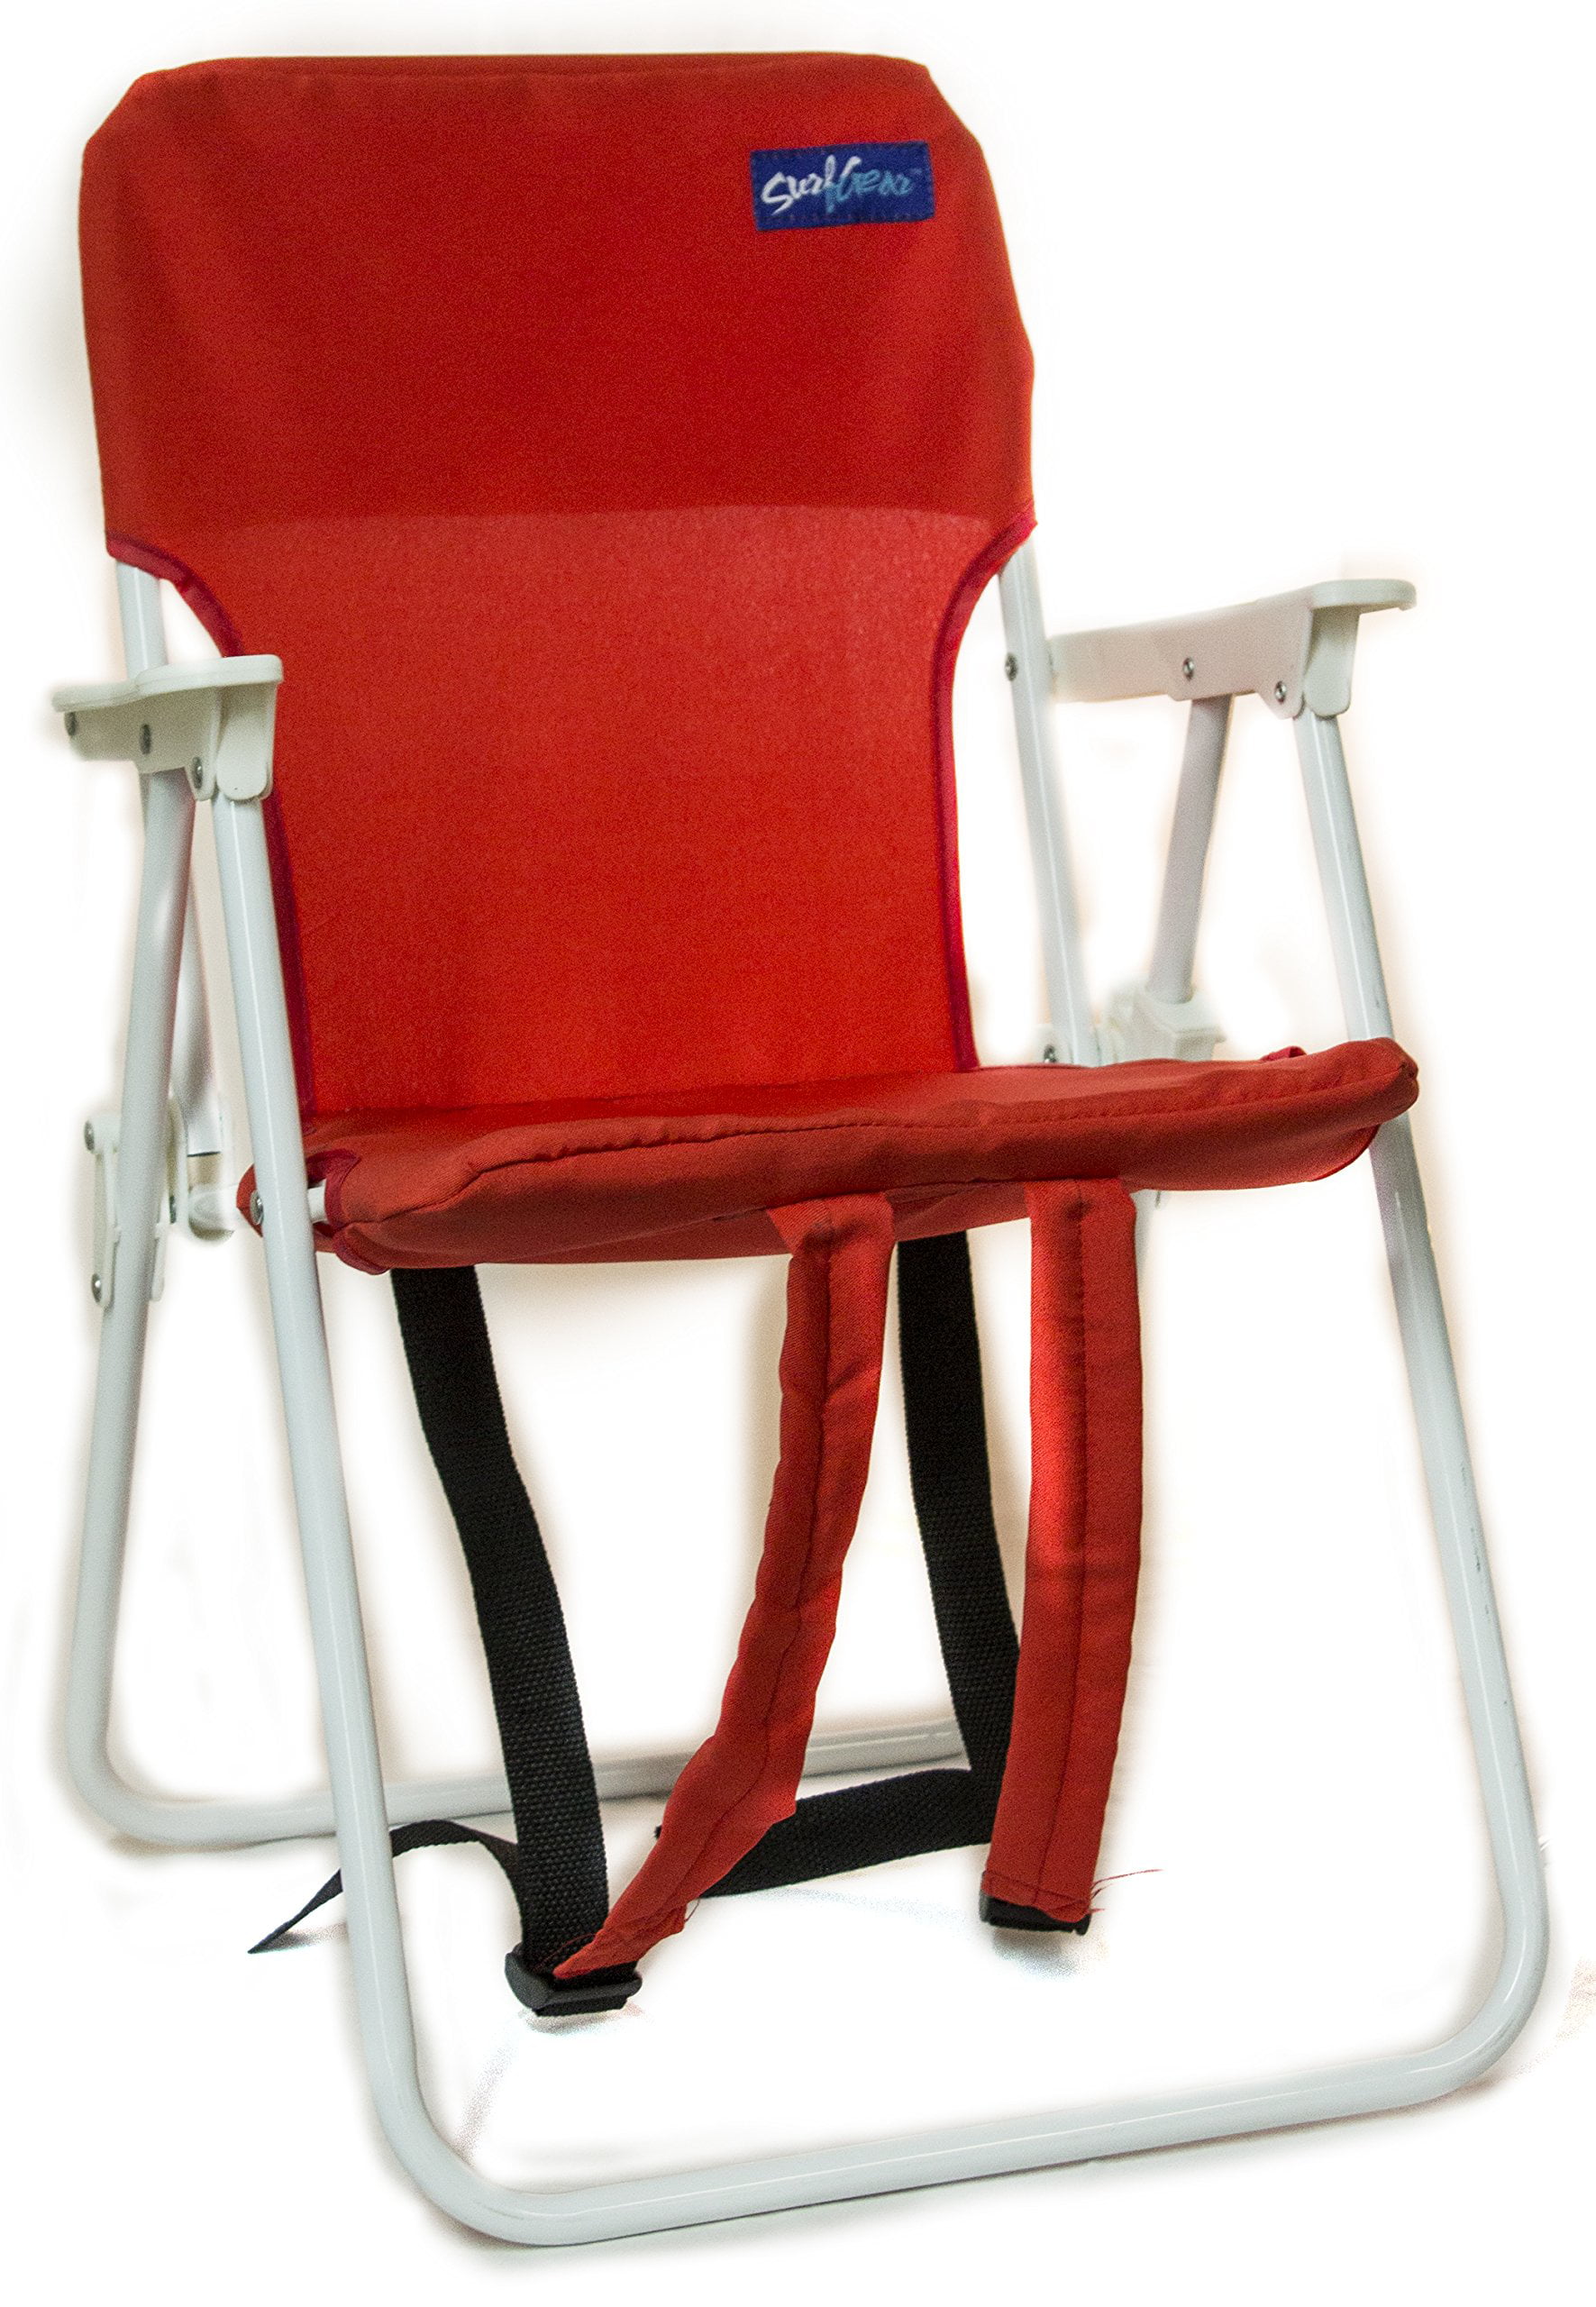 Simple Cvs Backpack Beach Chair for Small Space